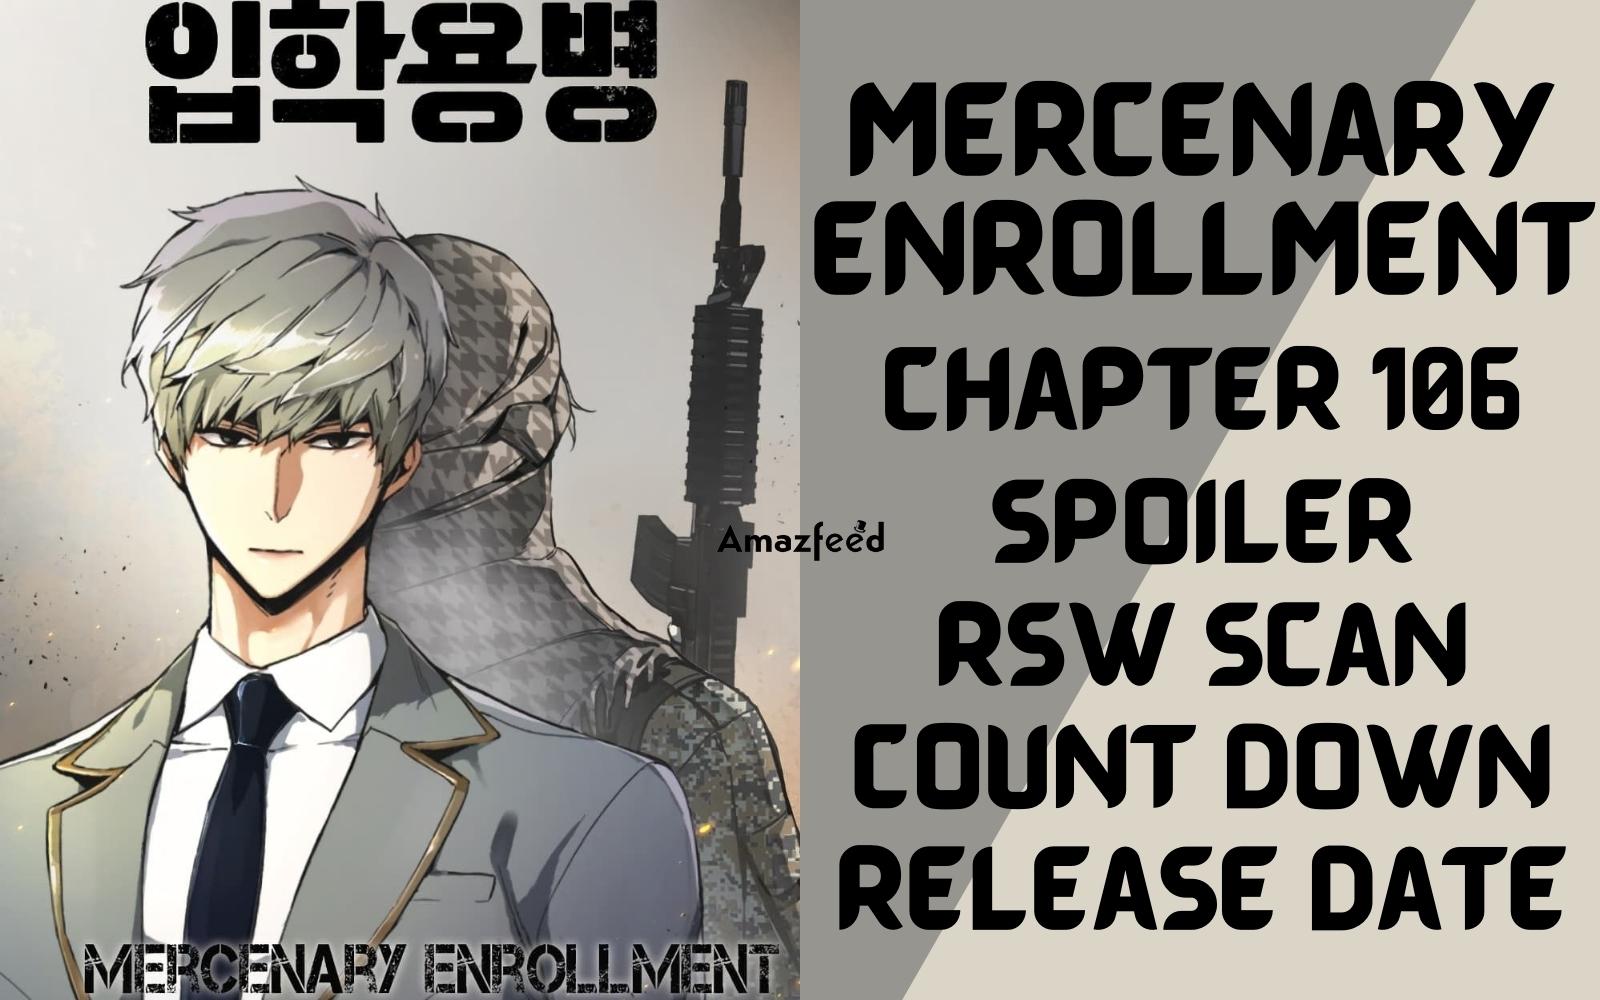 Mercenary Enrollment Chapter 106 Spoiler, Countdown, About, Synopsis, Release Date